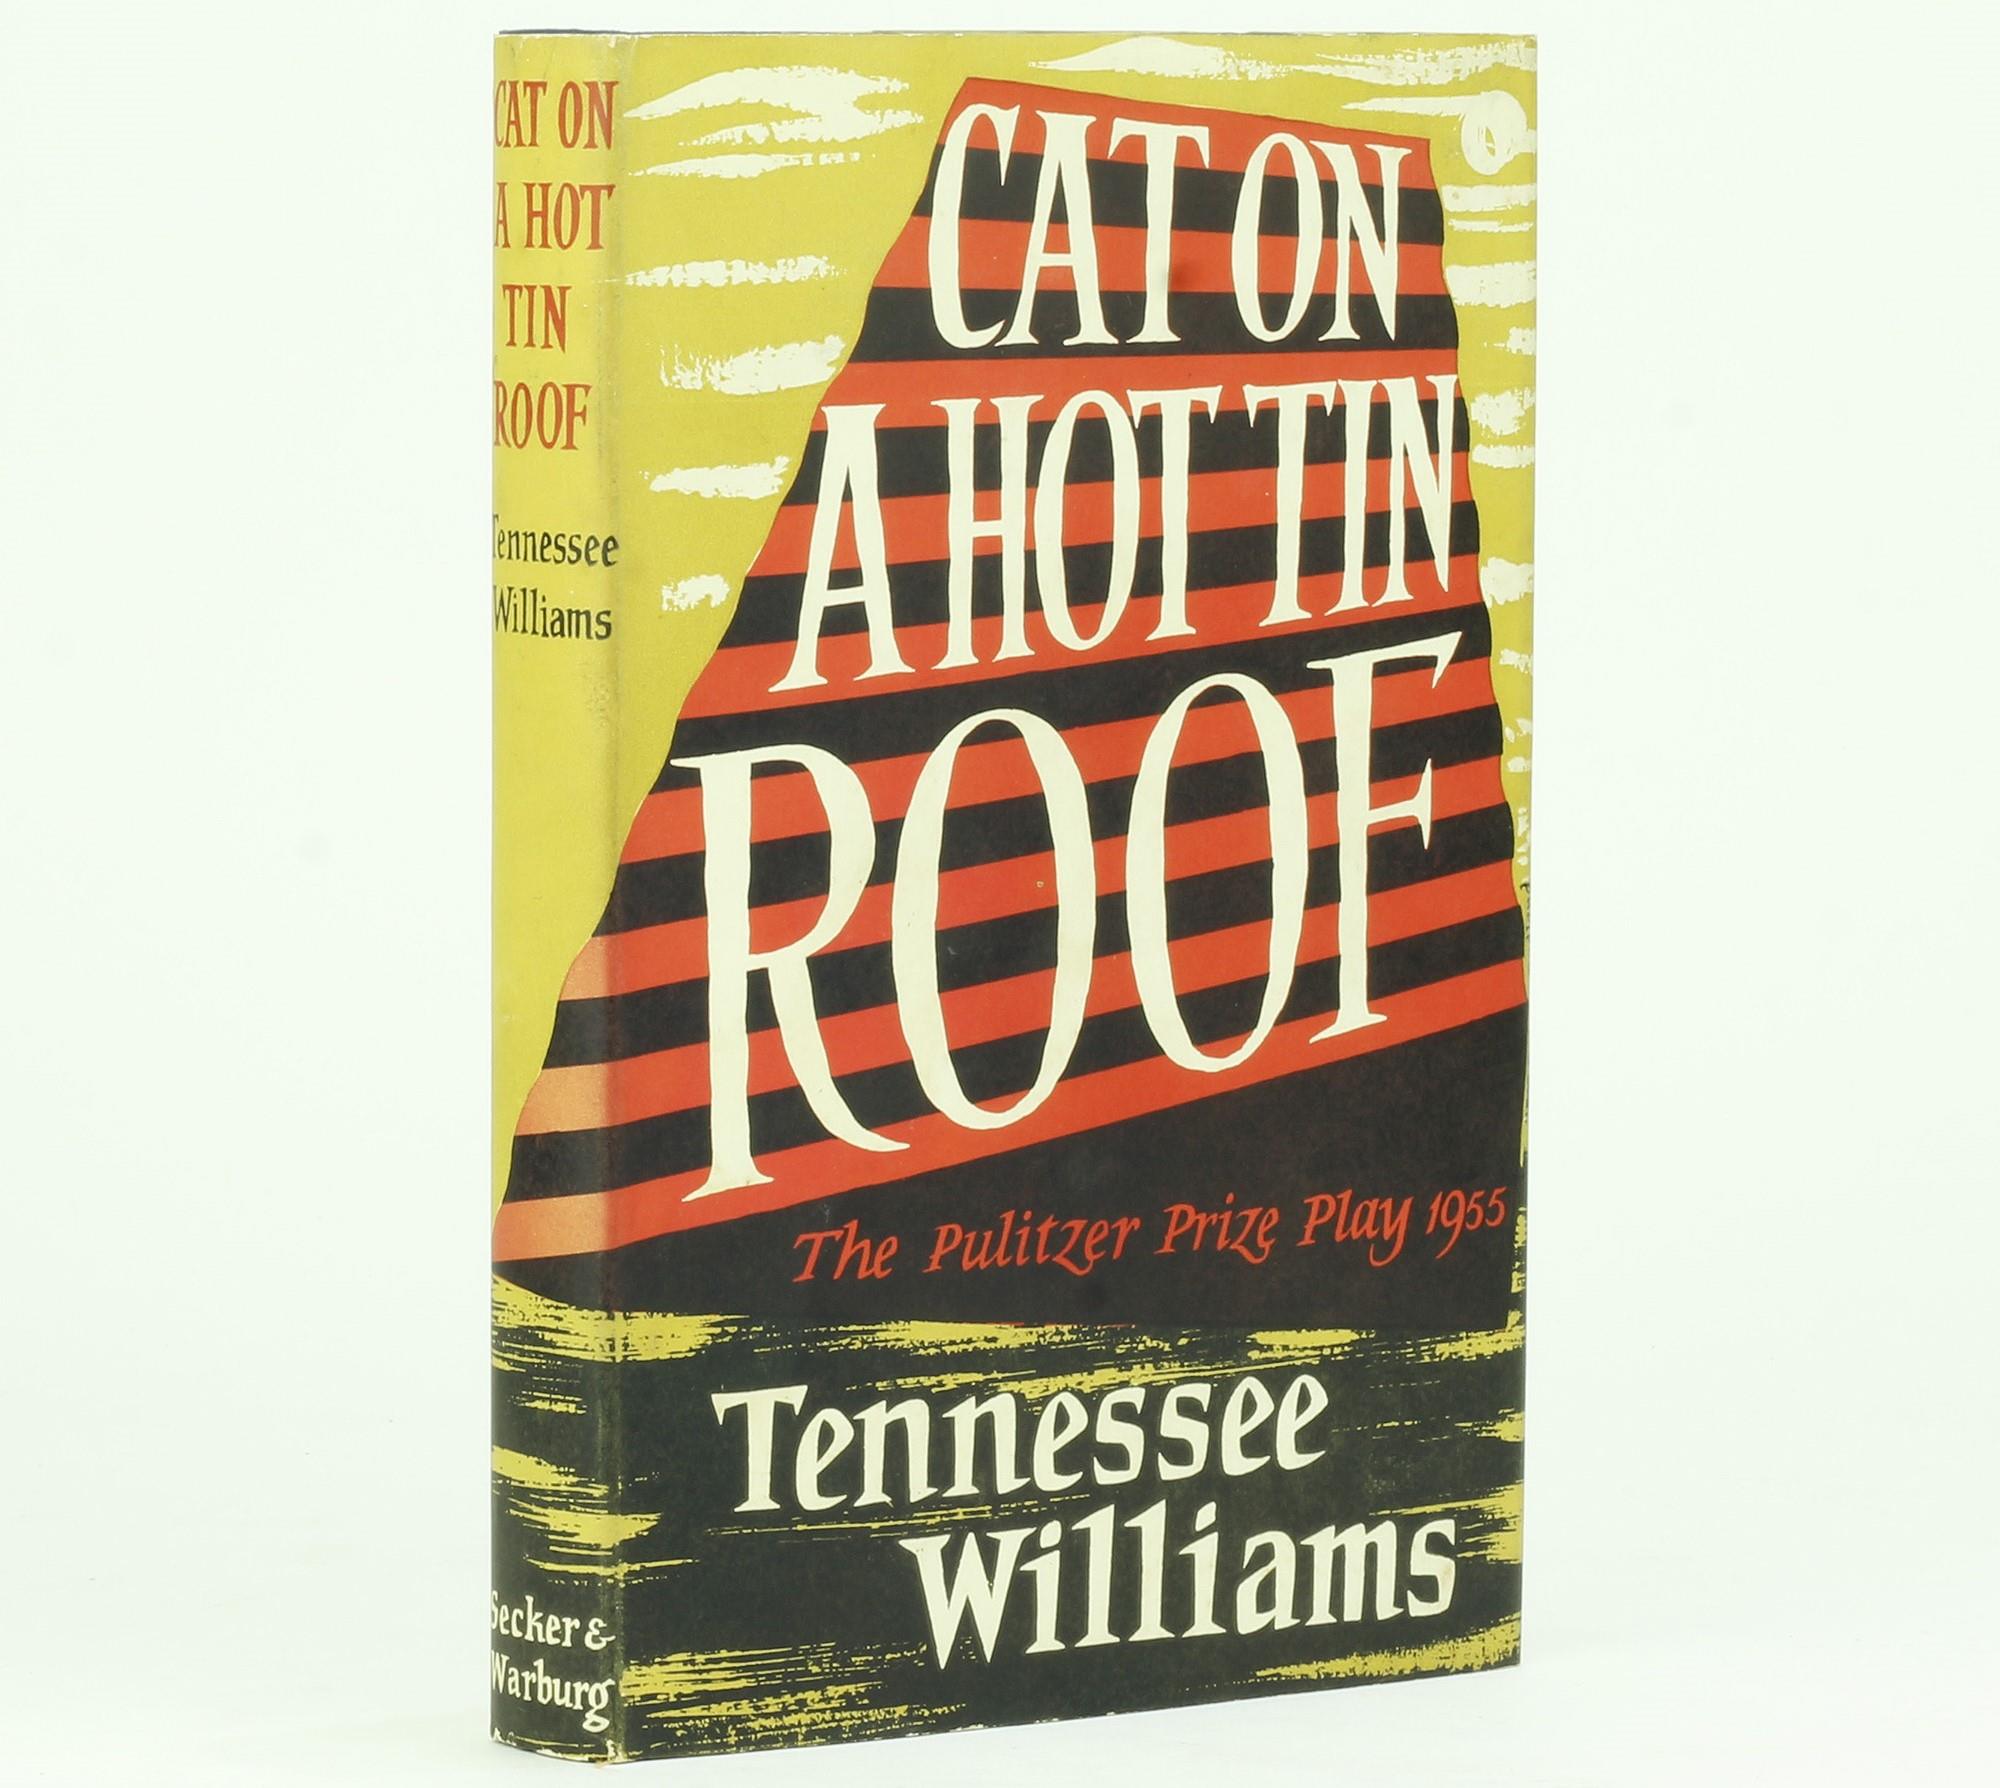 15-unbelievable-facts-about-cat-on-a-hot-tin-roof-tennessee-williams